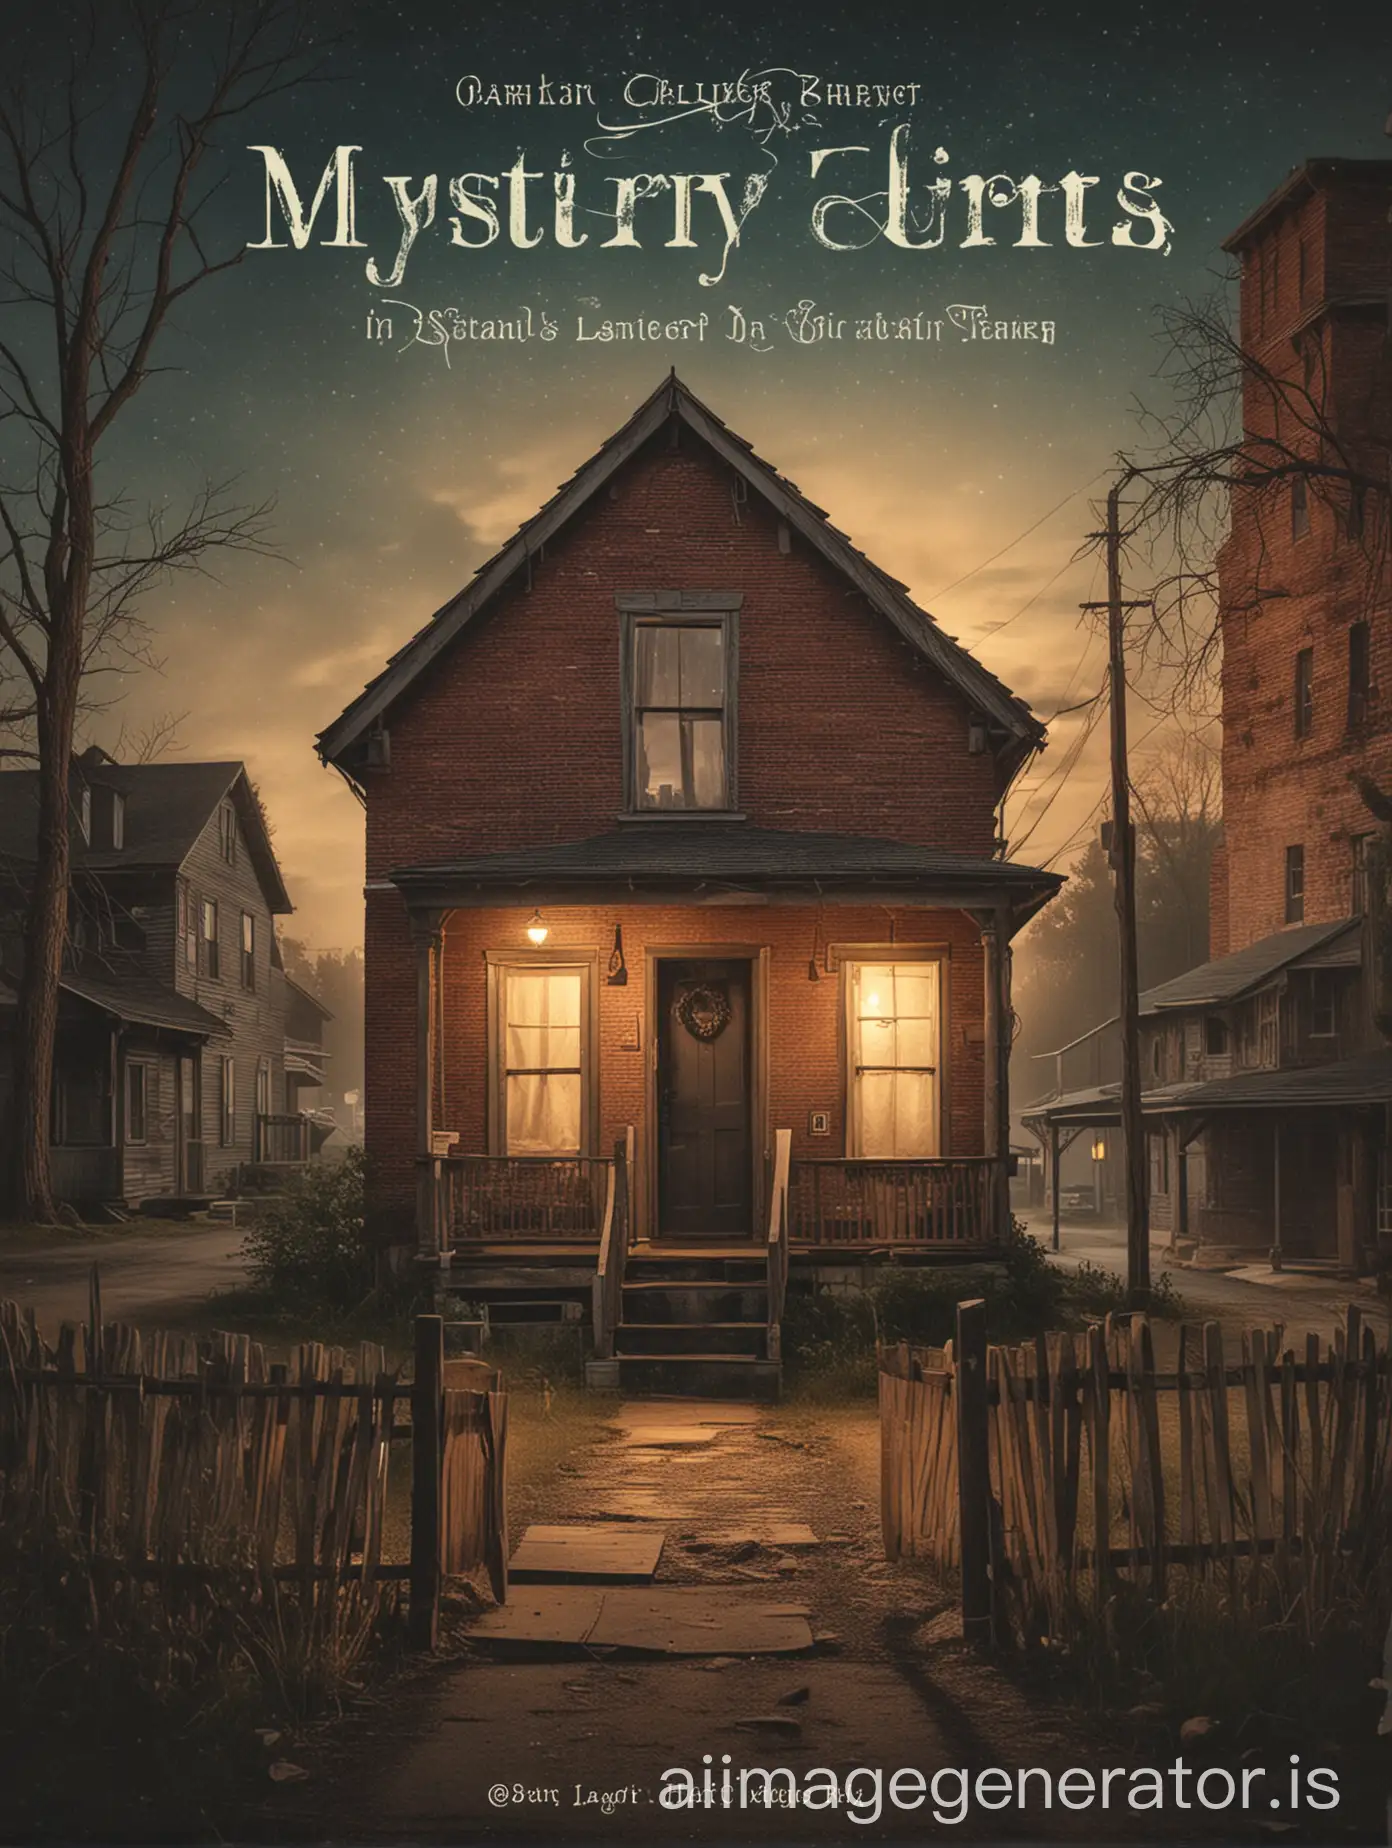 book cover of a story about mystery in a small town